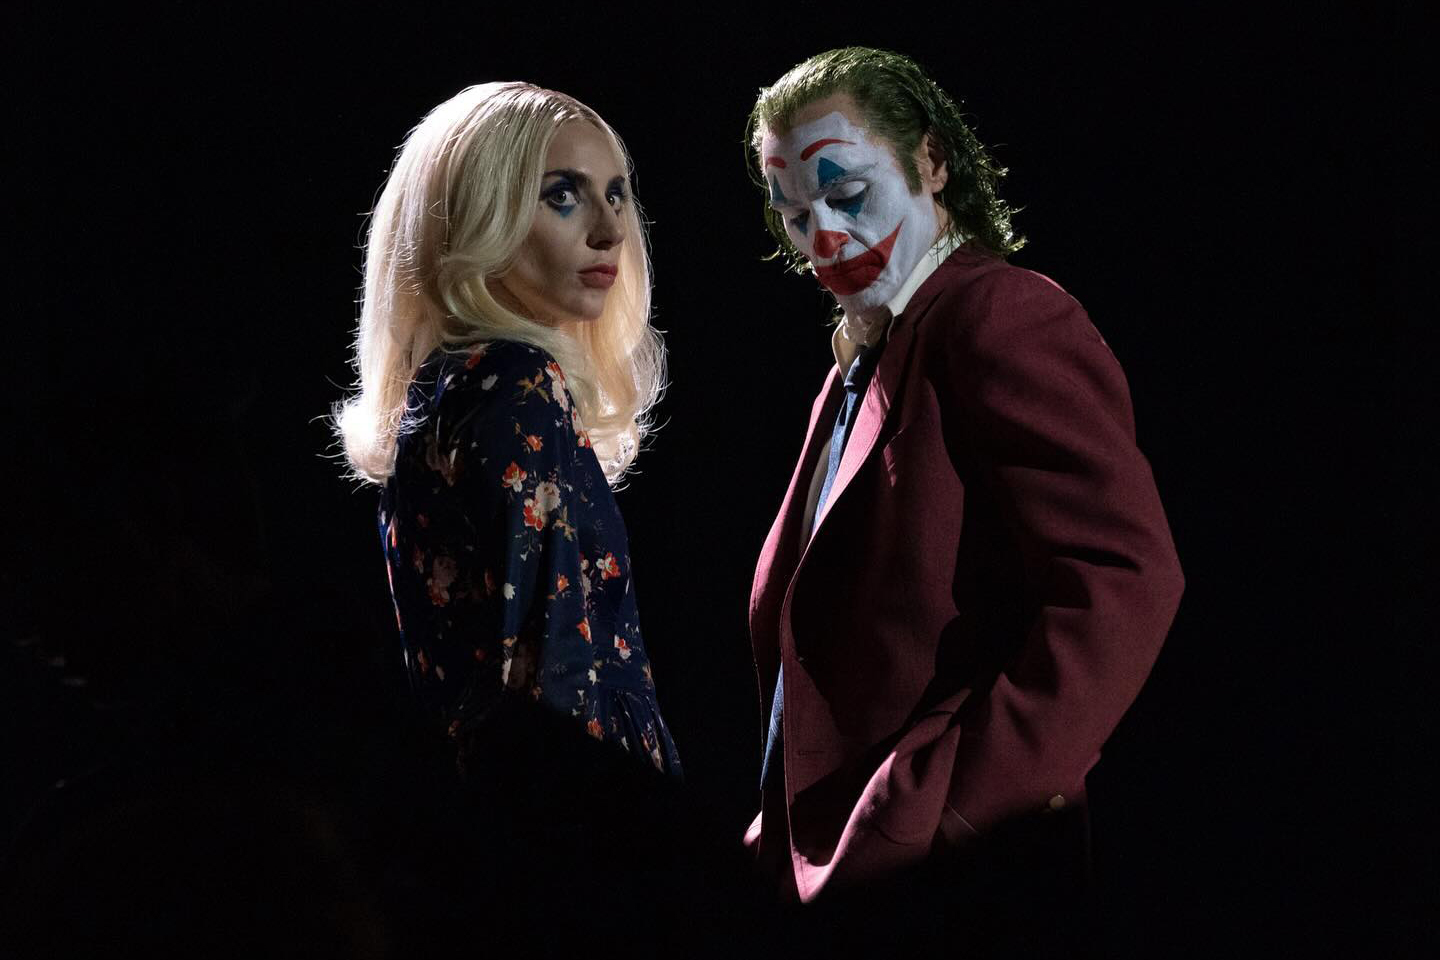 Joker and Harley Quinn Happy Valentine's Day: Todd Phillips posts photo of Joaquin Phoenix and Lady Gaga from upcoming film